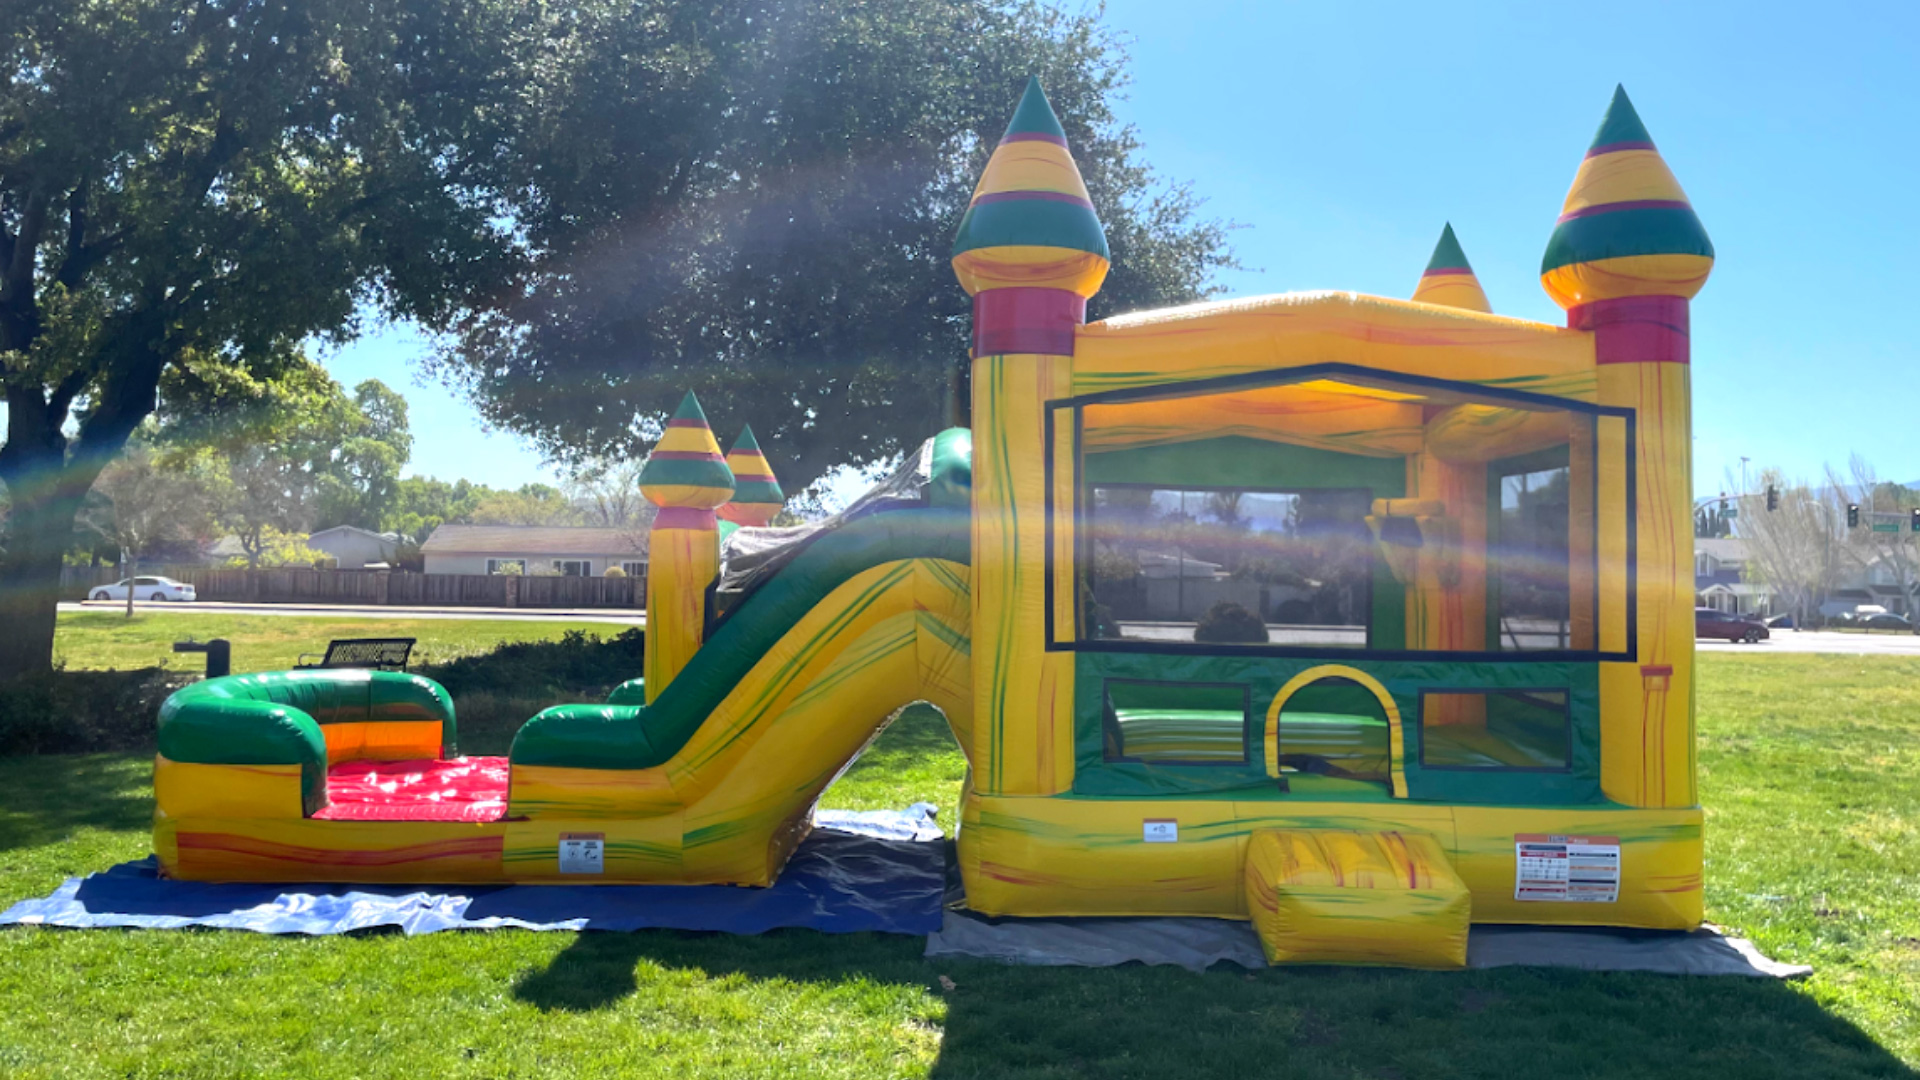 Rocket Jumpers - bounce house rentals and slides for parties in San Jose